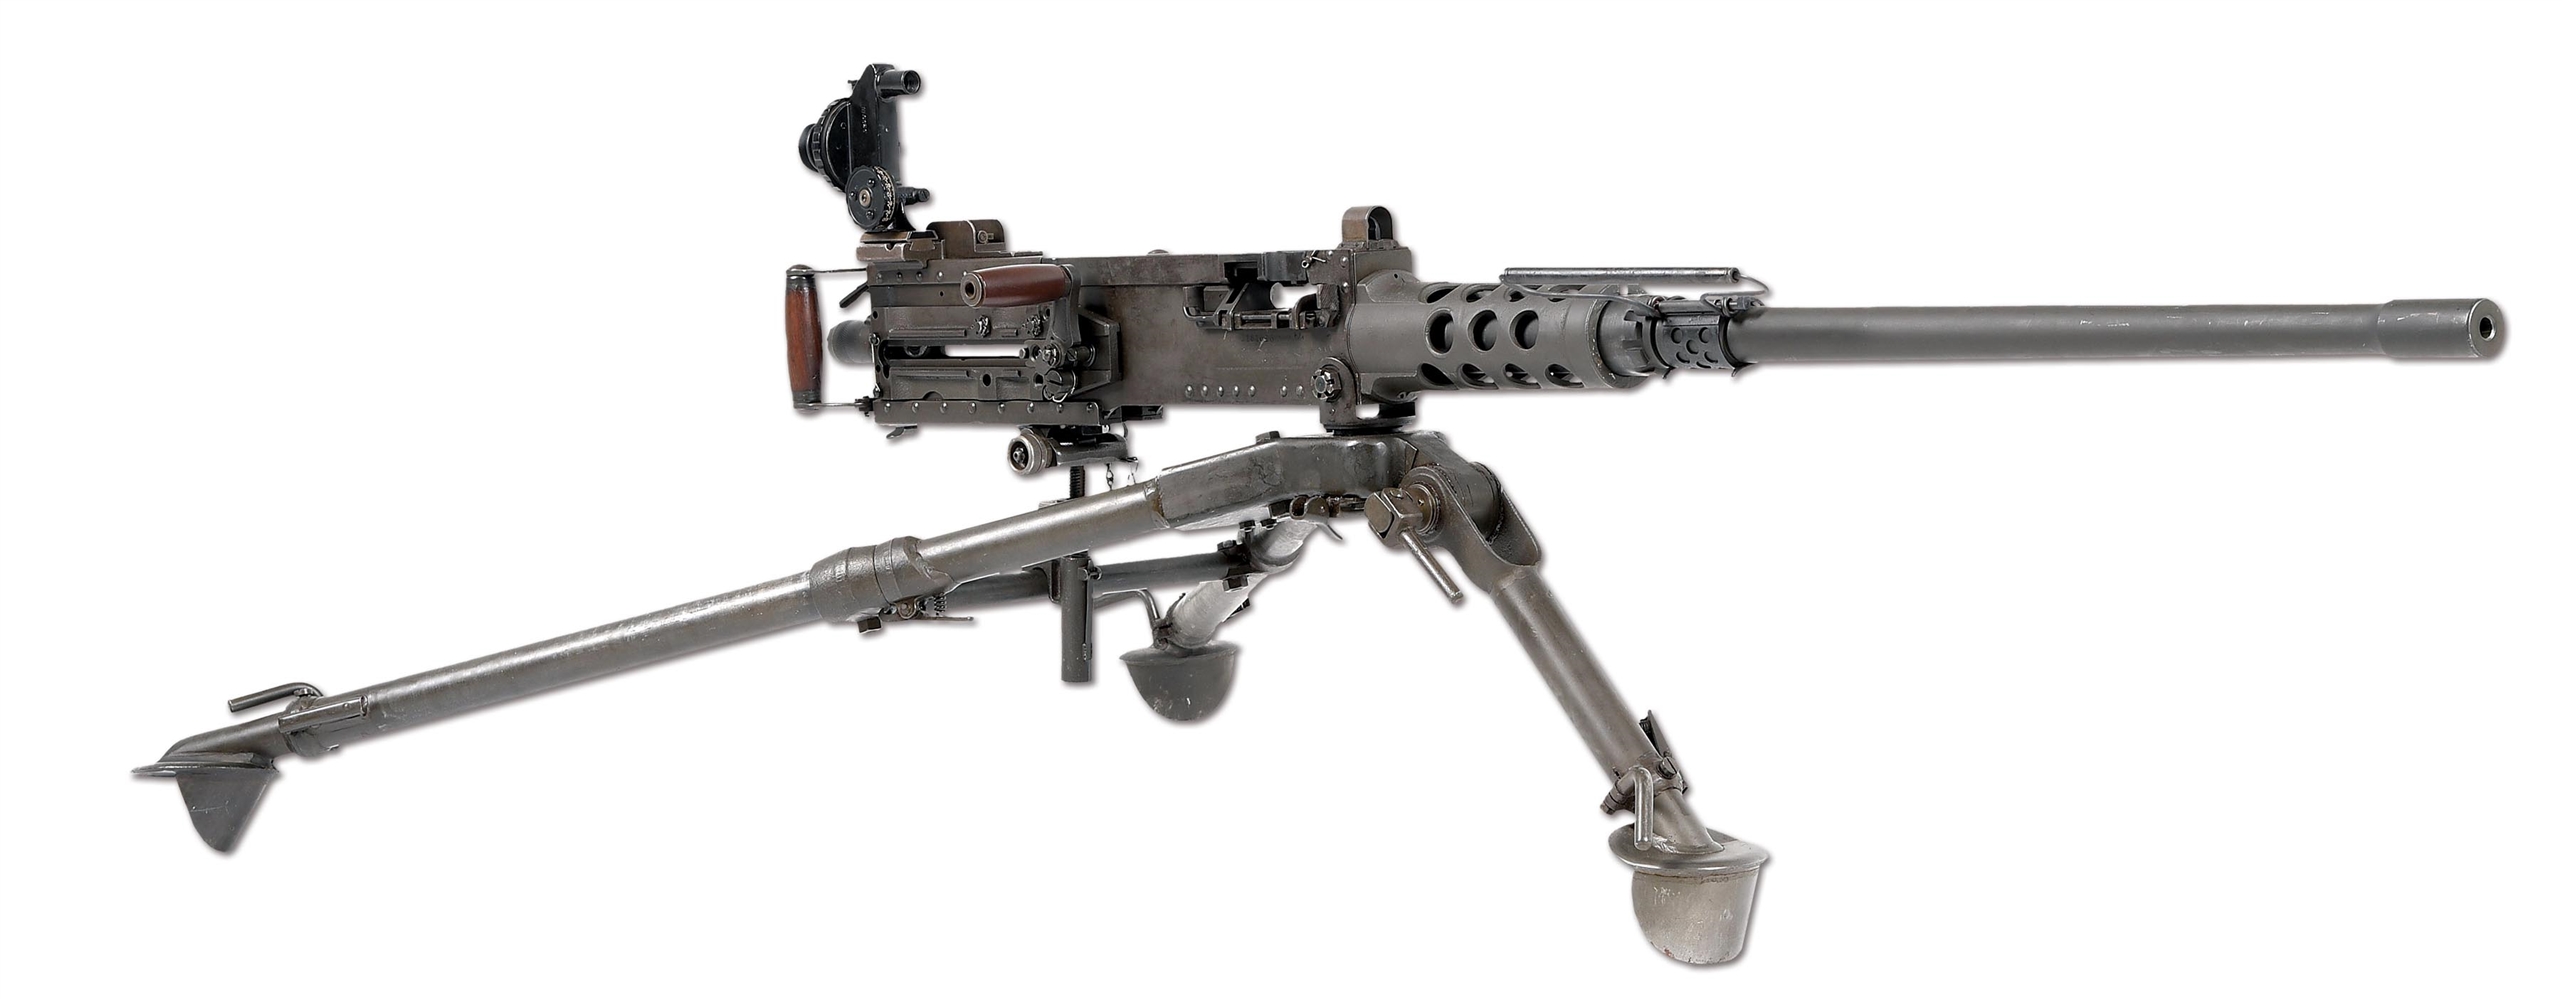 (N) VERY DESIRABLE WWII SAVAGE ARMS CO MANUFACTURED U.S. M2 HEAVY BARRELED .50 BMG MACHINE GUN WITH VINTAGE ORIGINAL OPTIC AND TRIPOD (CURIO AND RELIC).